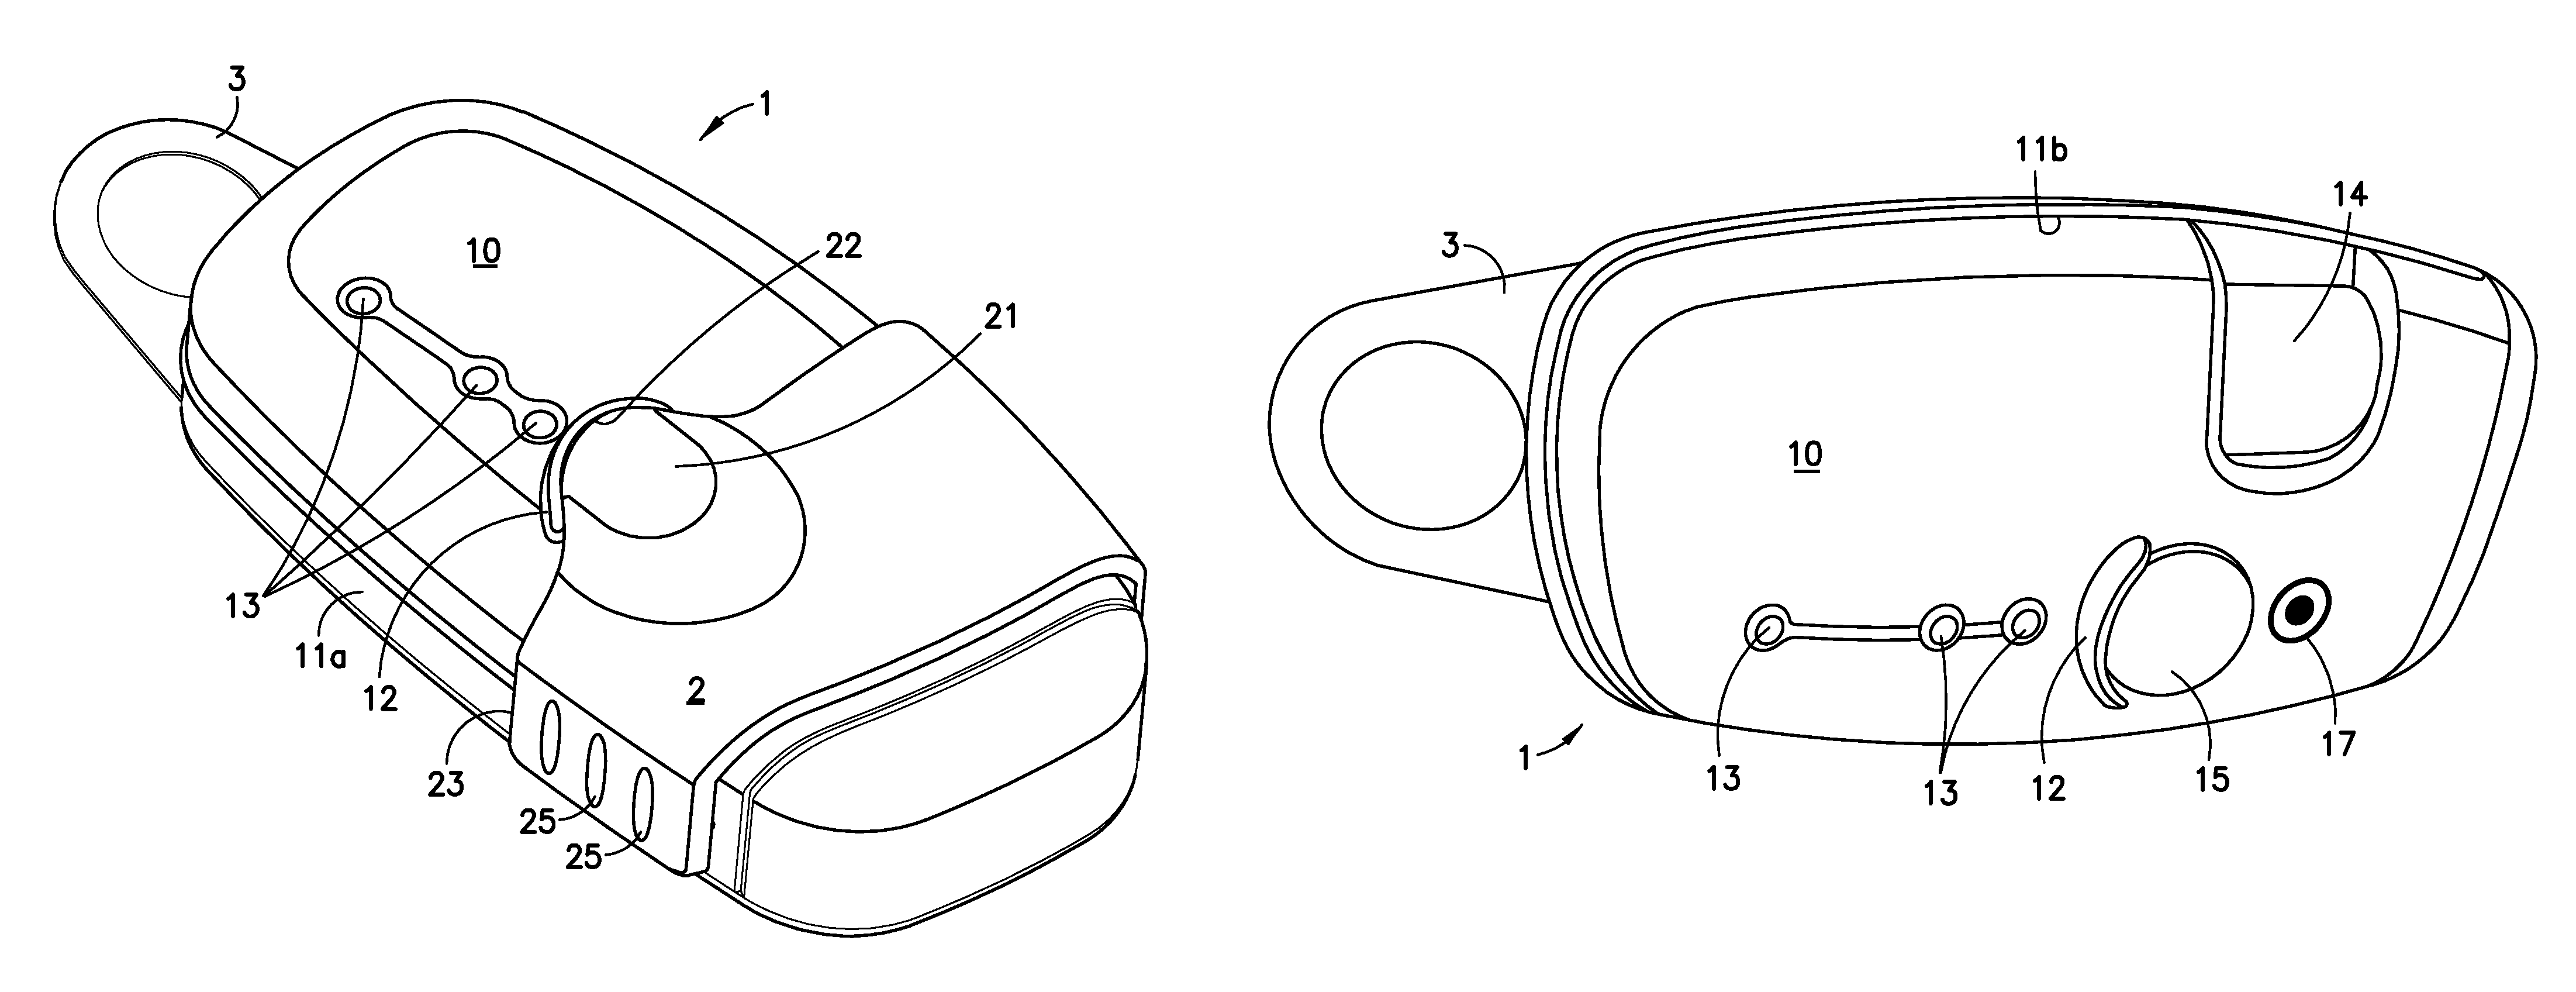 Infusion device with safety feature for preventing inadvertent activation